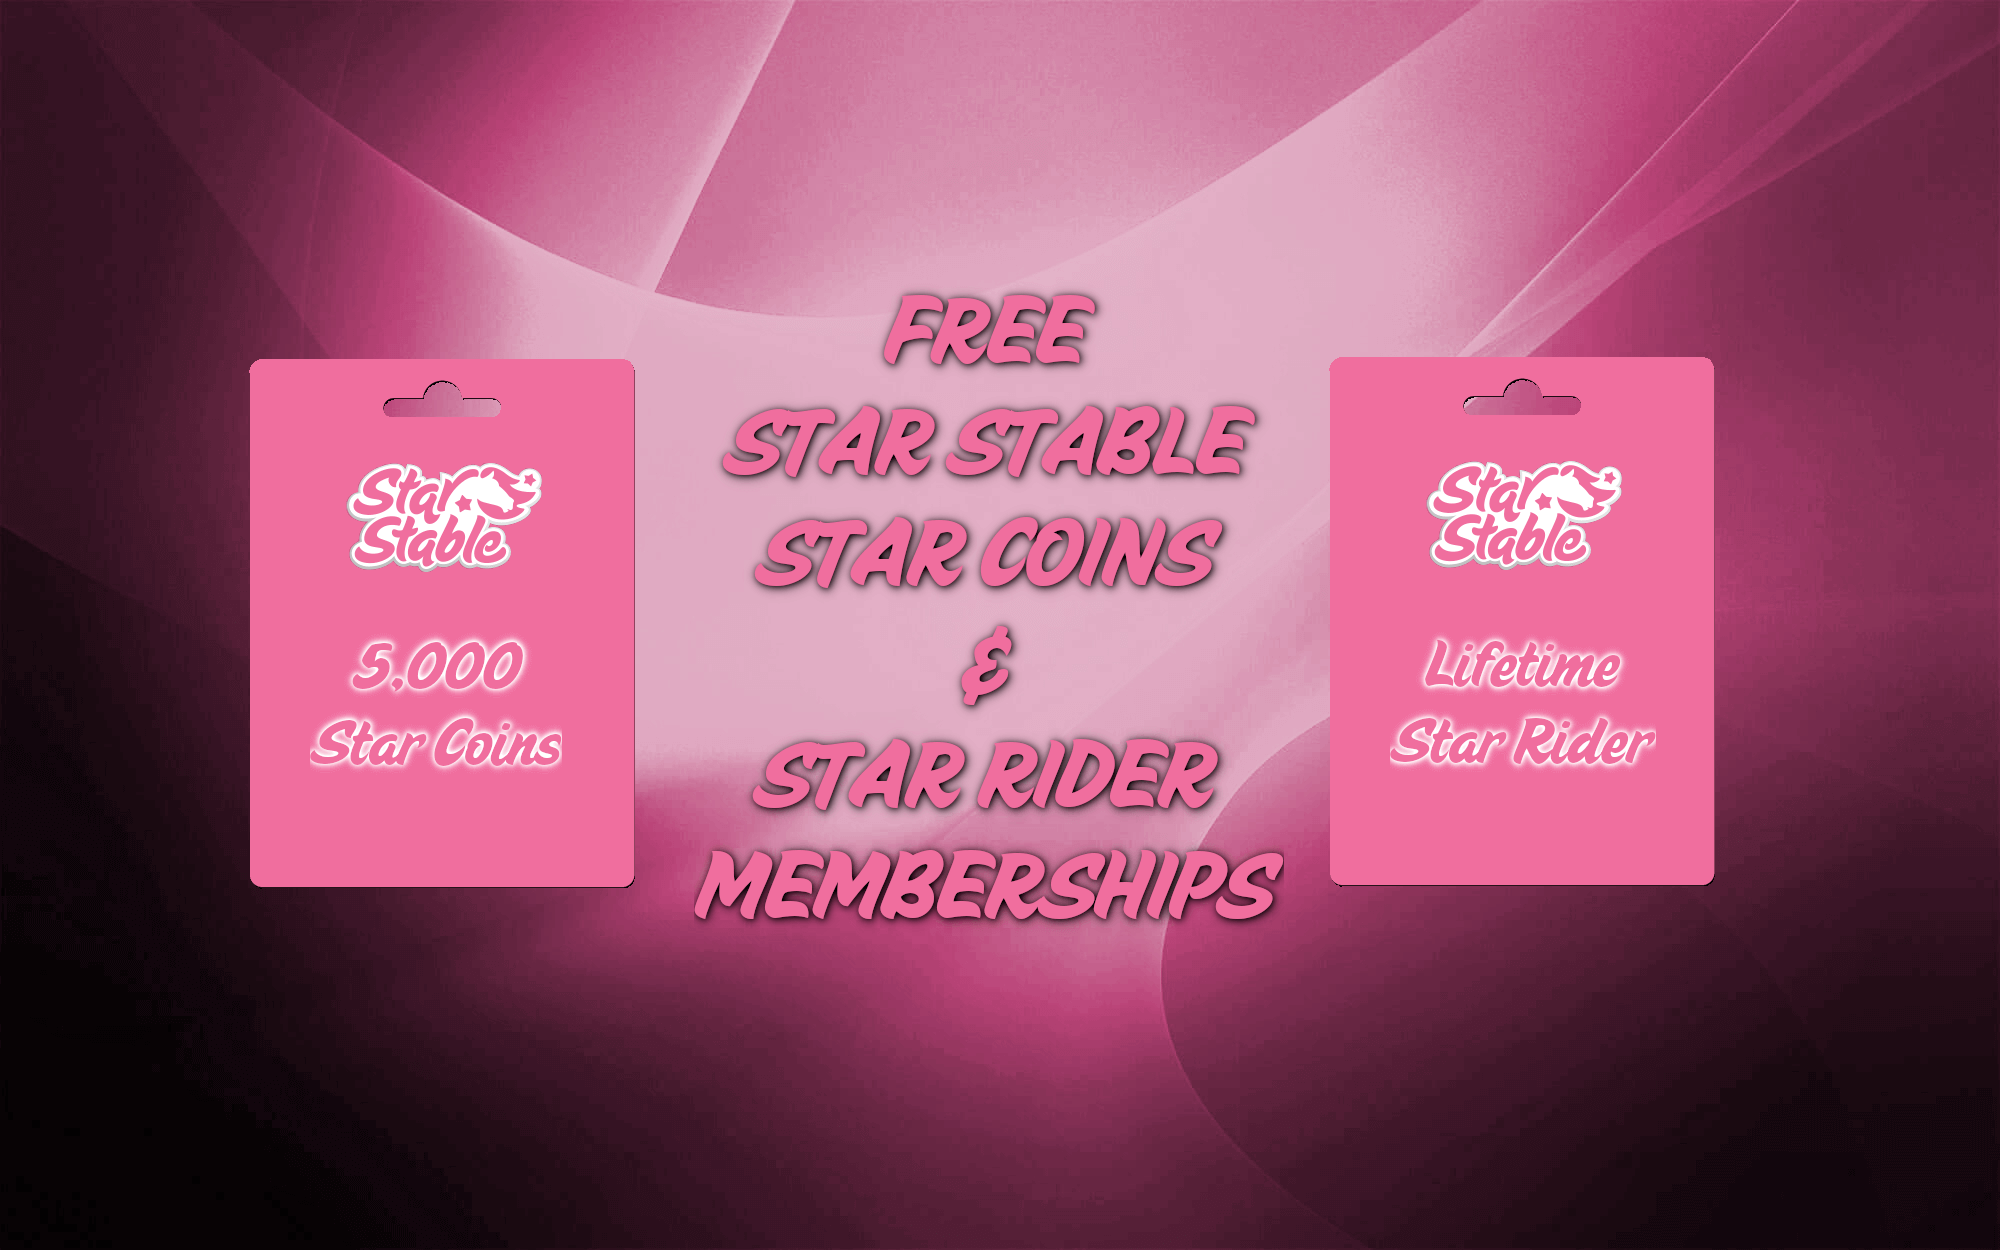 Free Star Stable Codes & Star Rider Lifetime Memberships